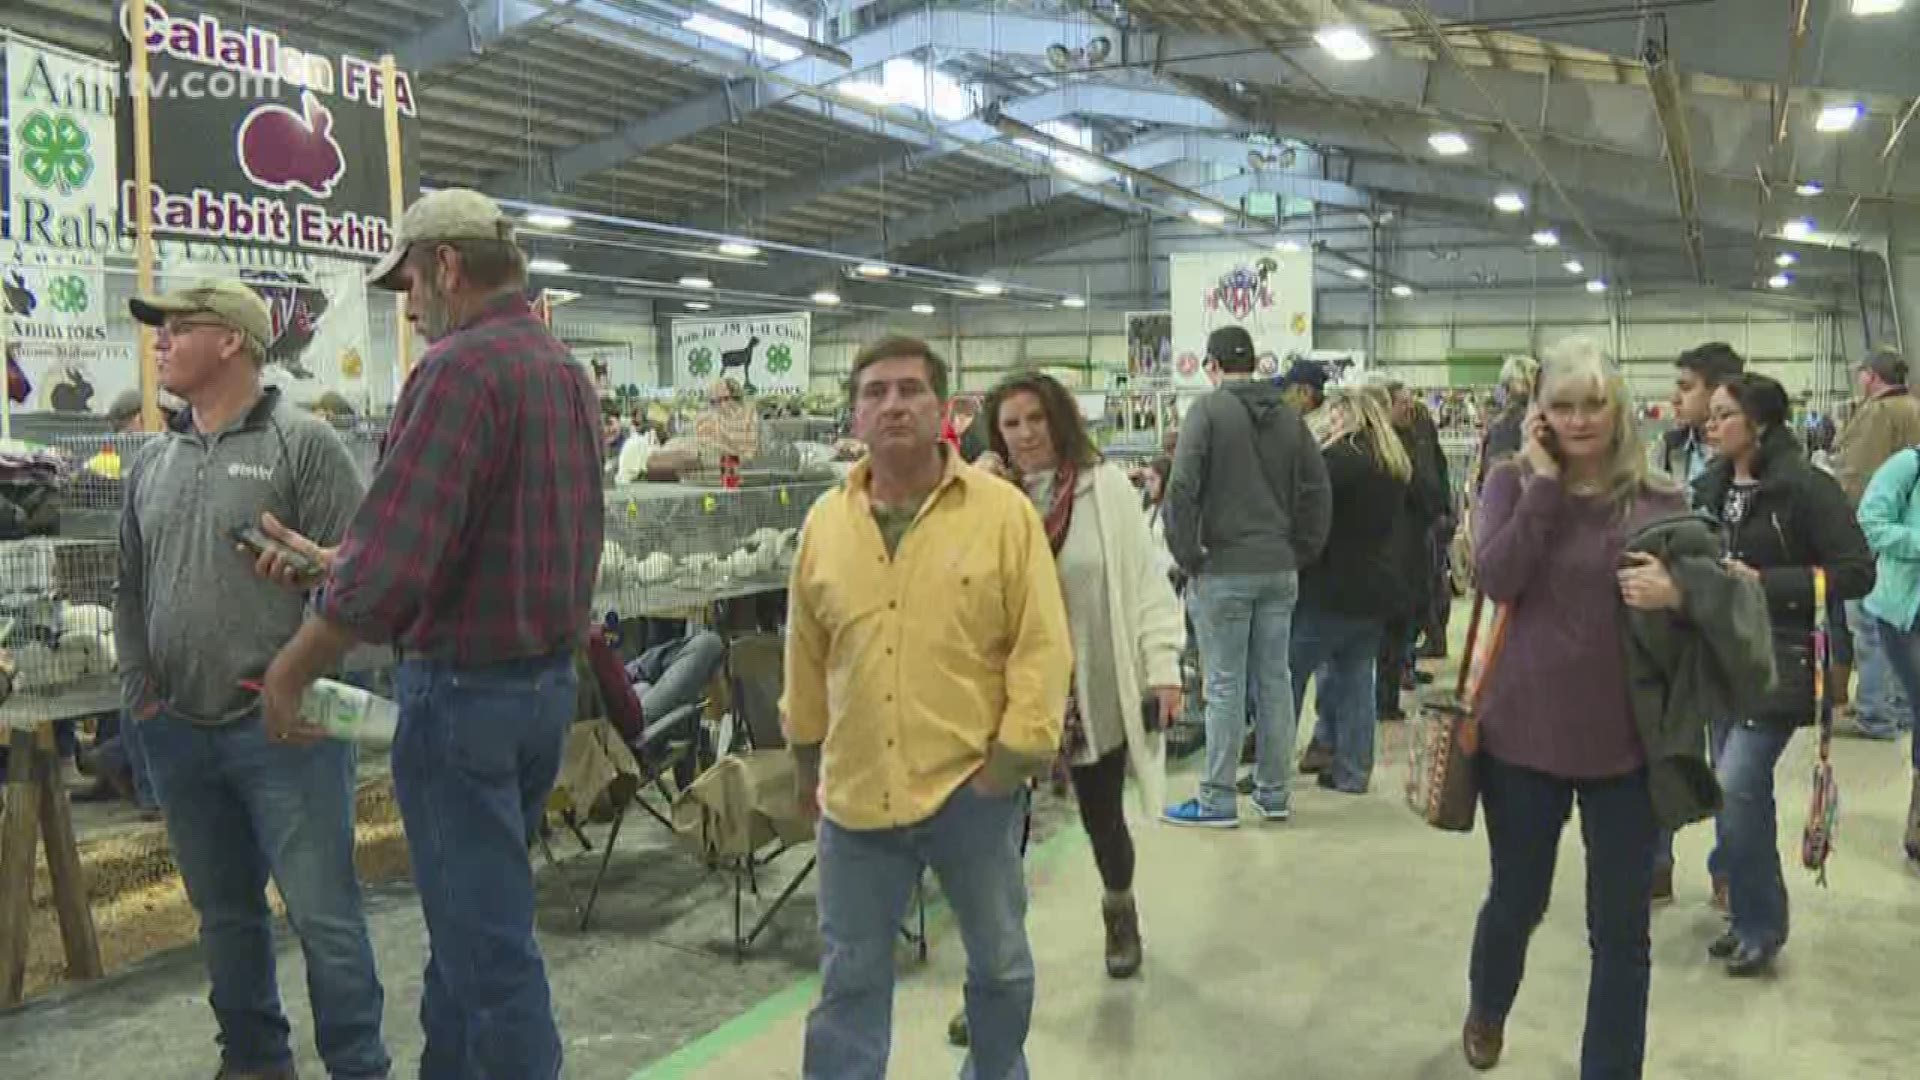 Over 1,000 students have been preparing all year long to show off their prized livestock and other creations to judges.